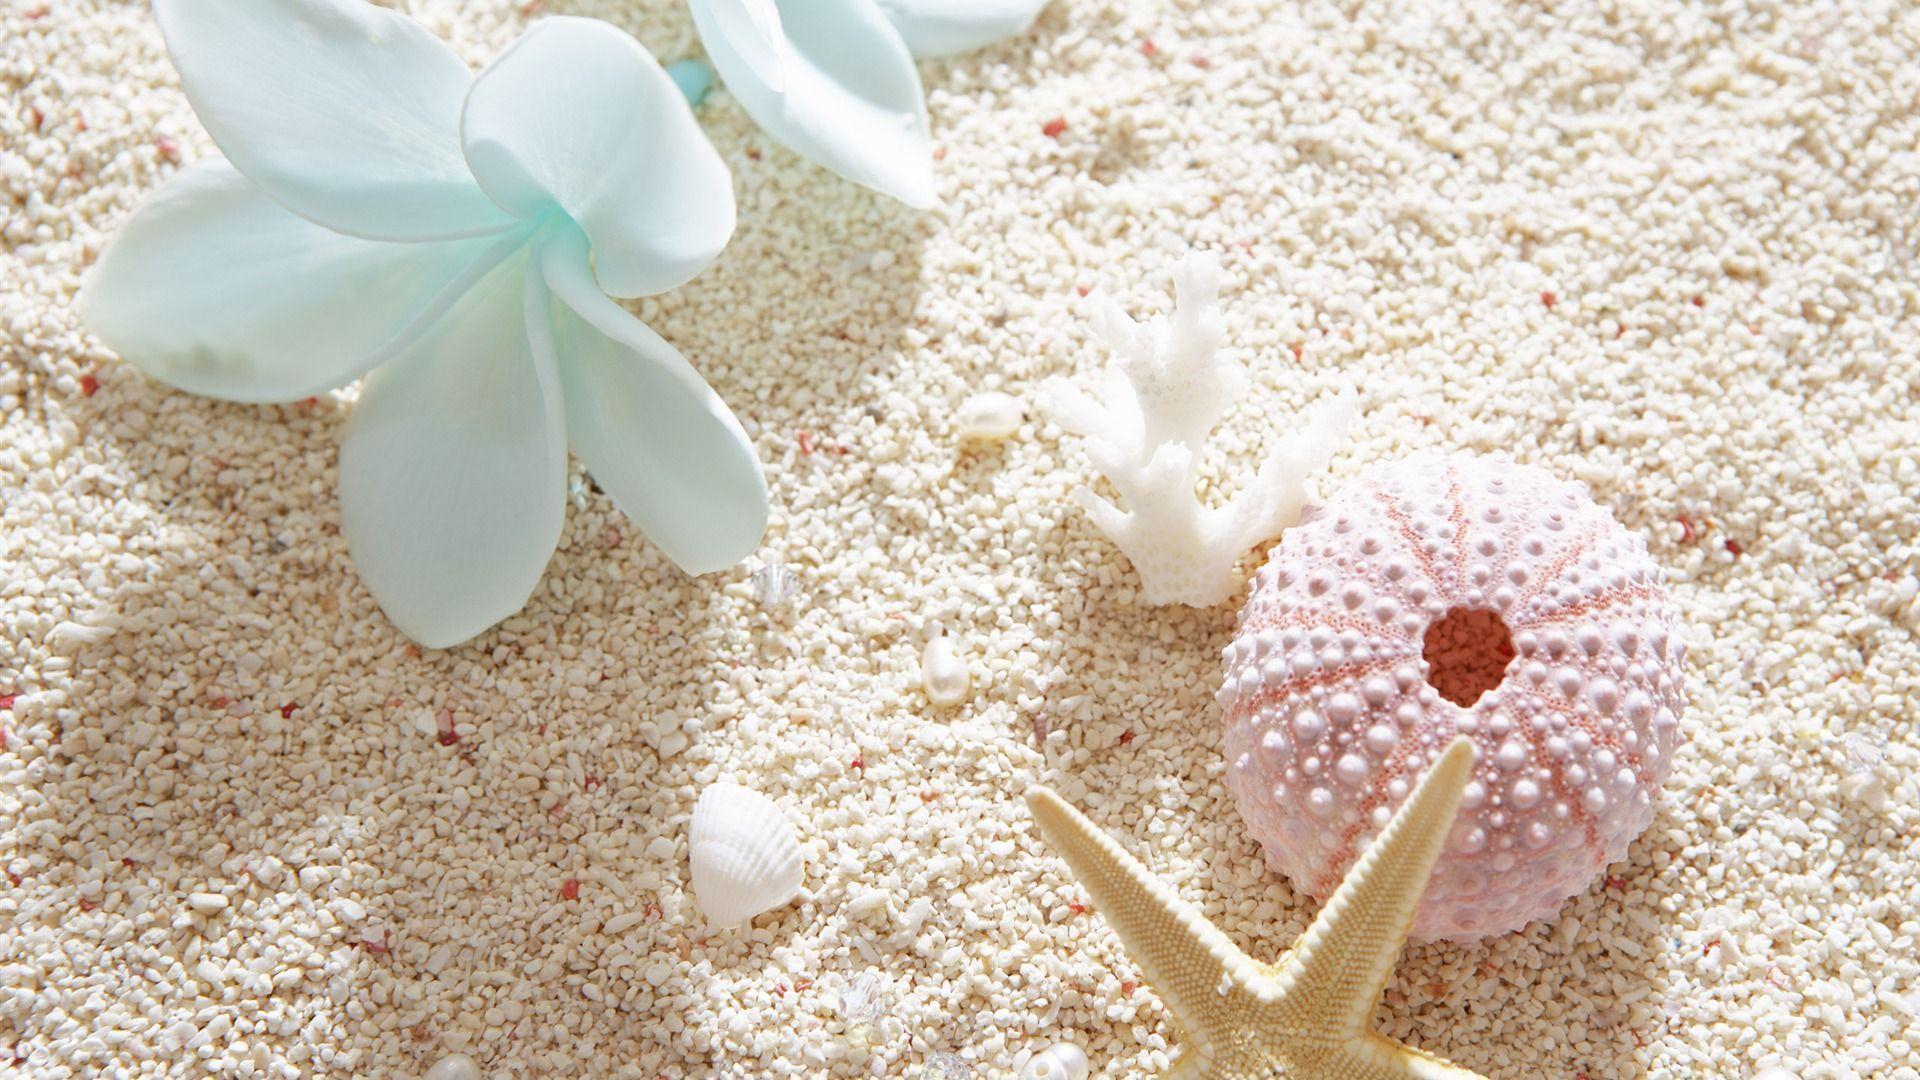 Seashell Wallpapers 17107 1920x1080 px